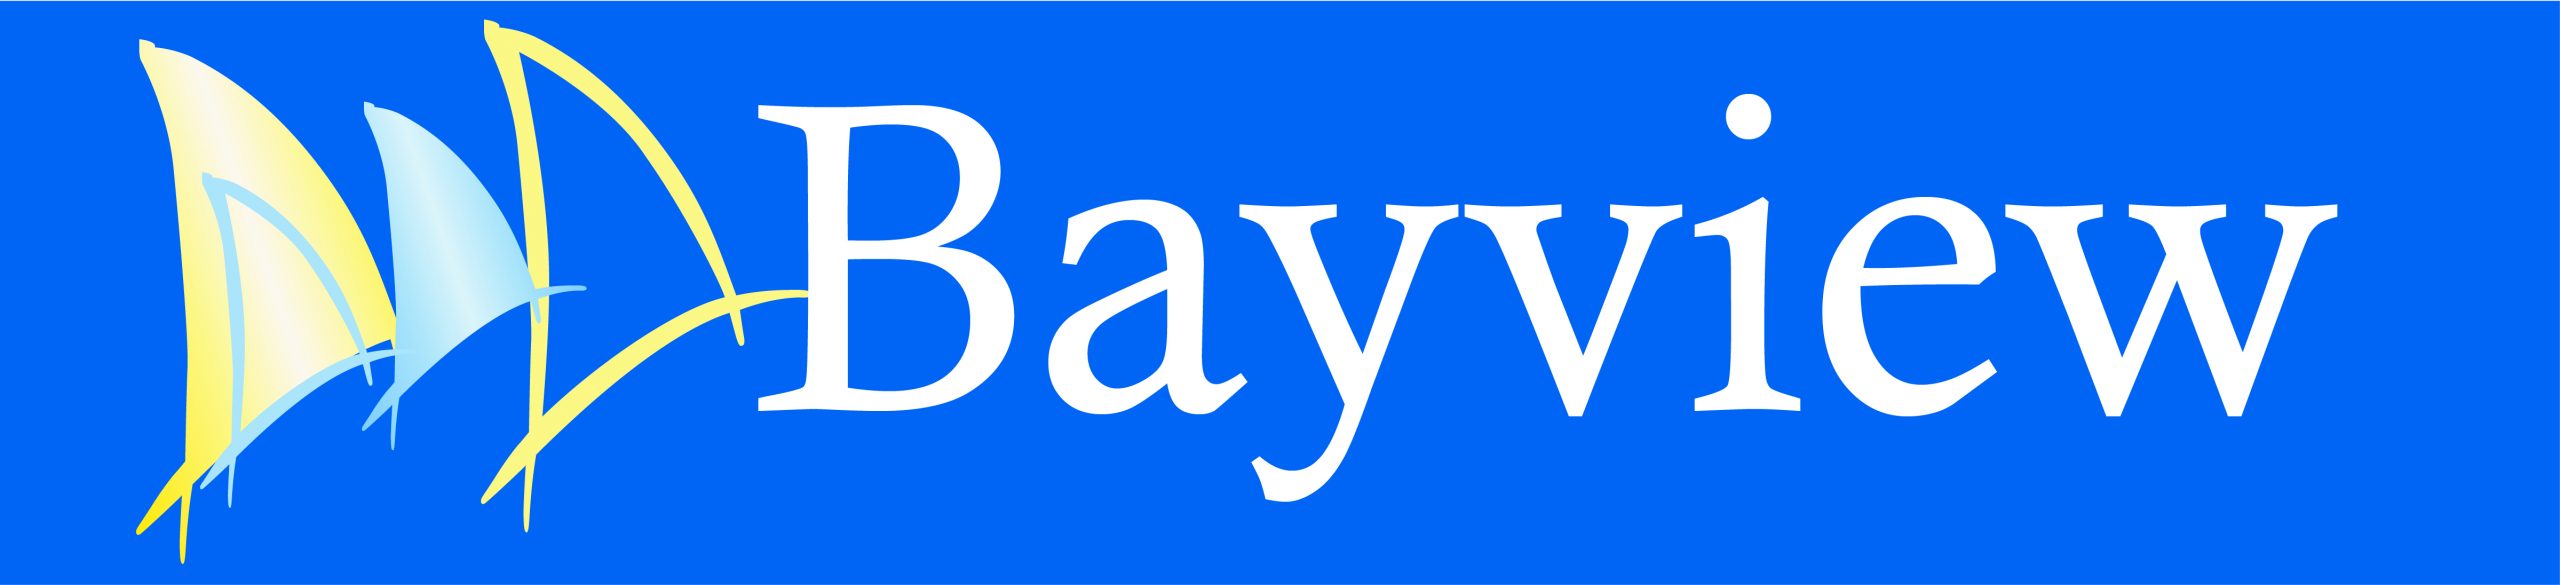 Bayview Real Estate